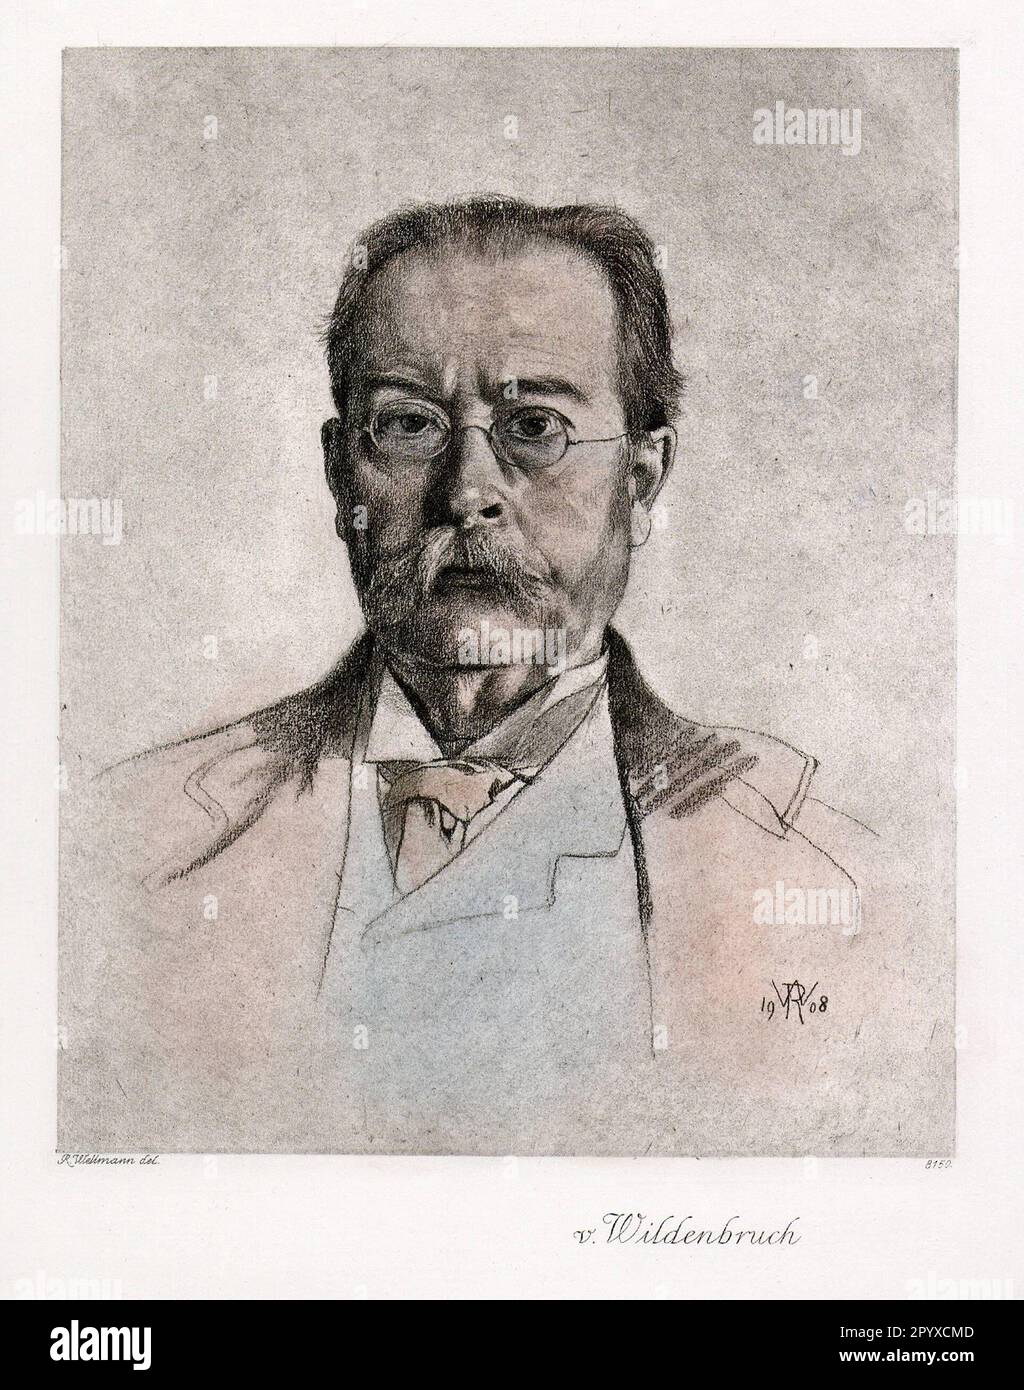 Ernst von Wildenbruch (1845-1909), German author. Photo after a drawing by Wellmann. Photo: Heliogravure, Corpus Imaginum, Hanfstaengl Collection. [automated translation] Stock Photo